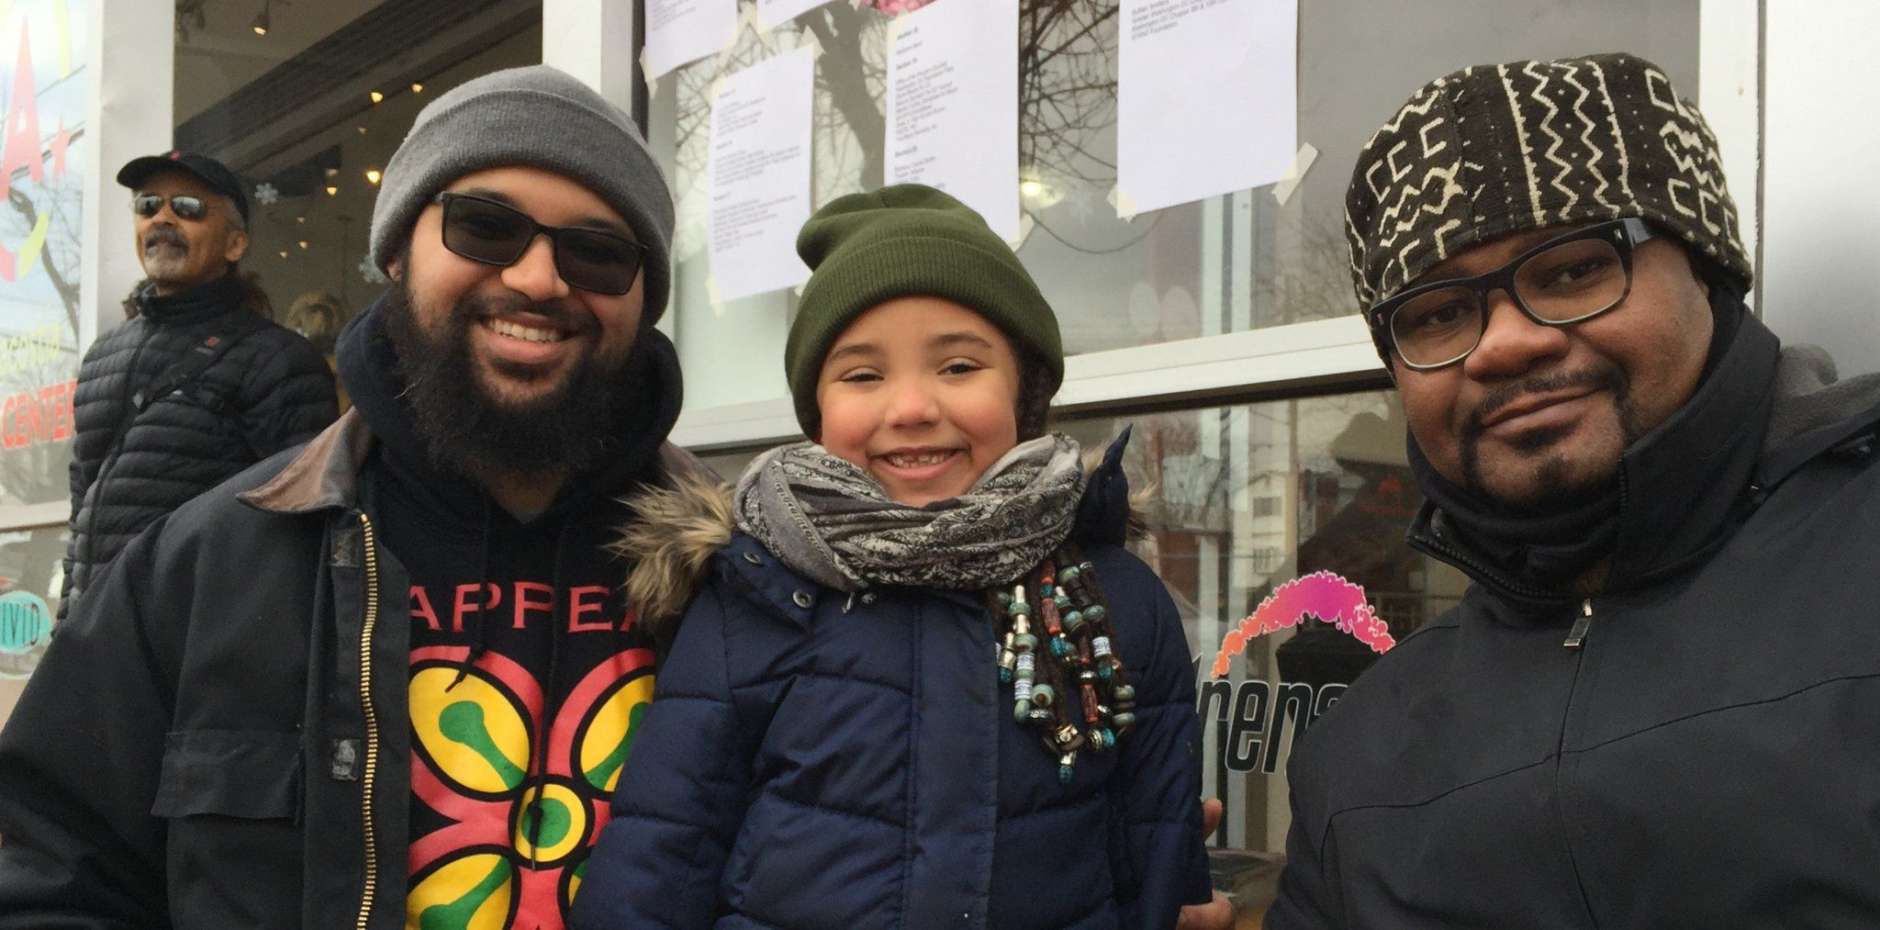 Mike Bolds, Ife Bolds Jacob, Emile Smith at the MLK Peace Walk and Parade. Ife Jacob, 5, said, "His dream was that everybody was treated fairly and that segregation would stop and that people wouldn't be hurt by the color of their skin." (WTOP/Kristi King)